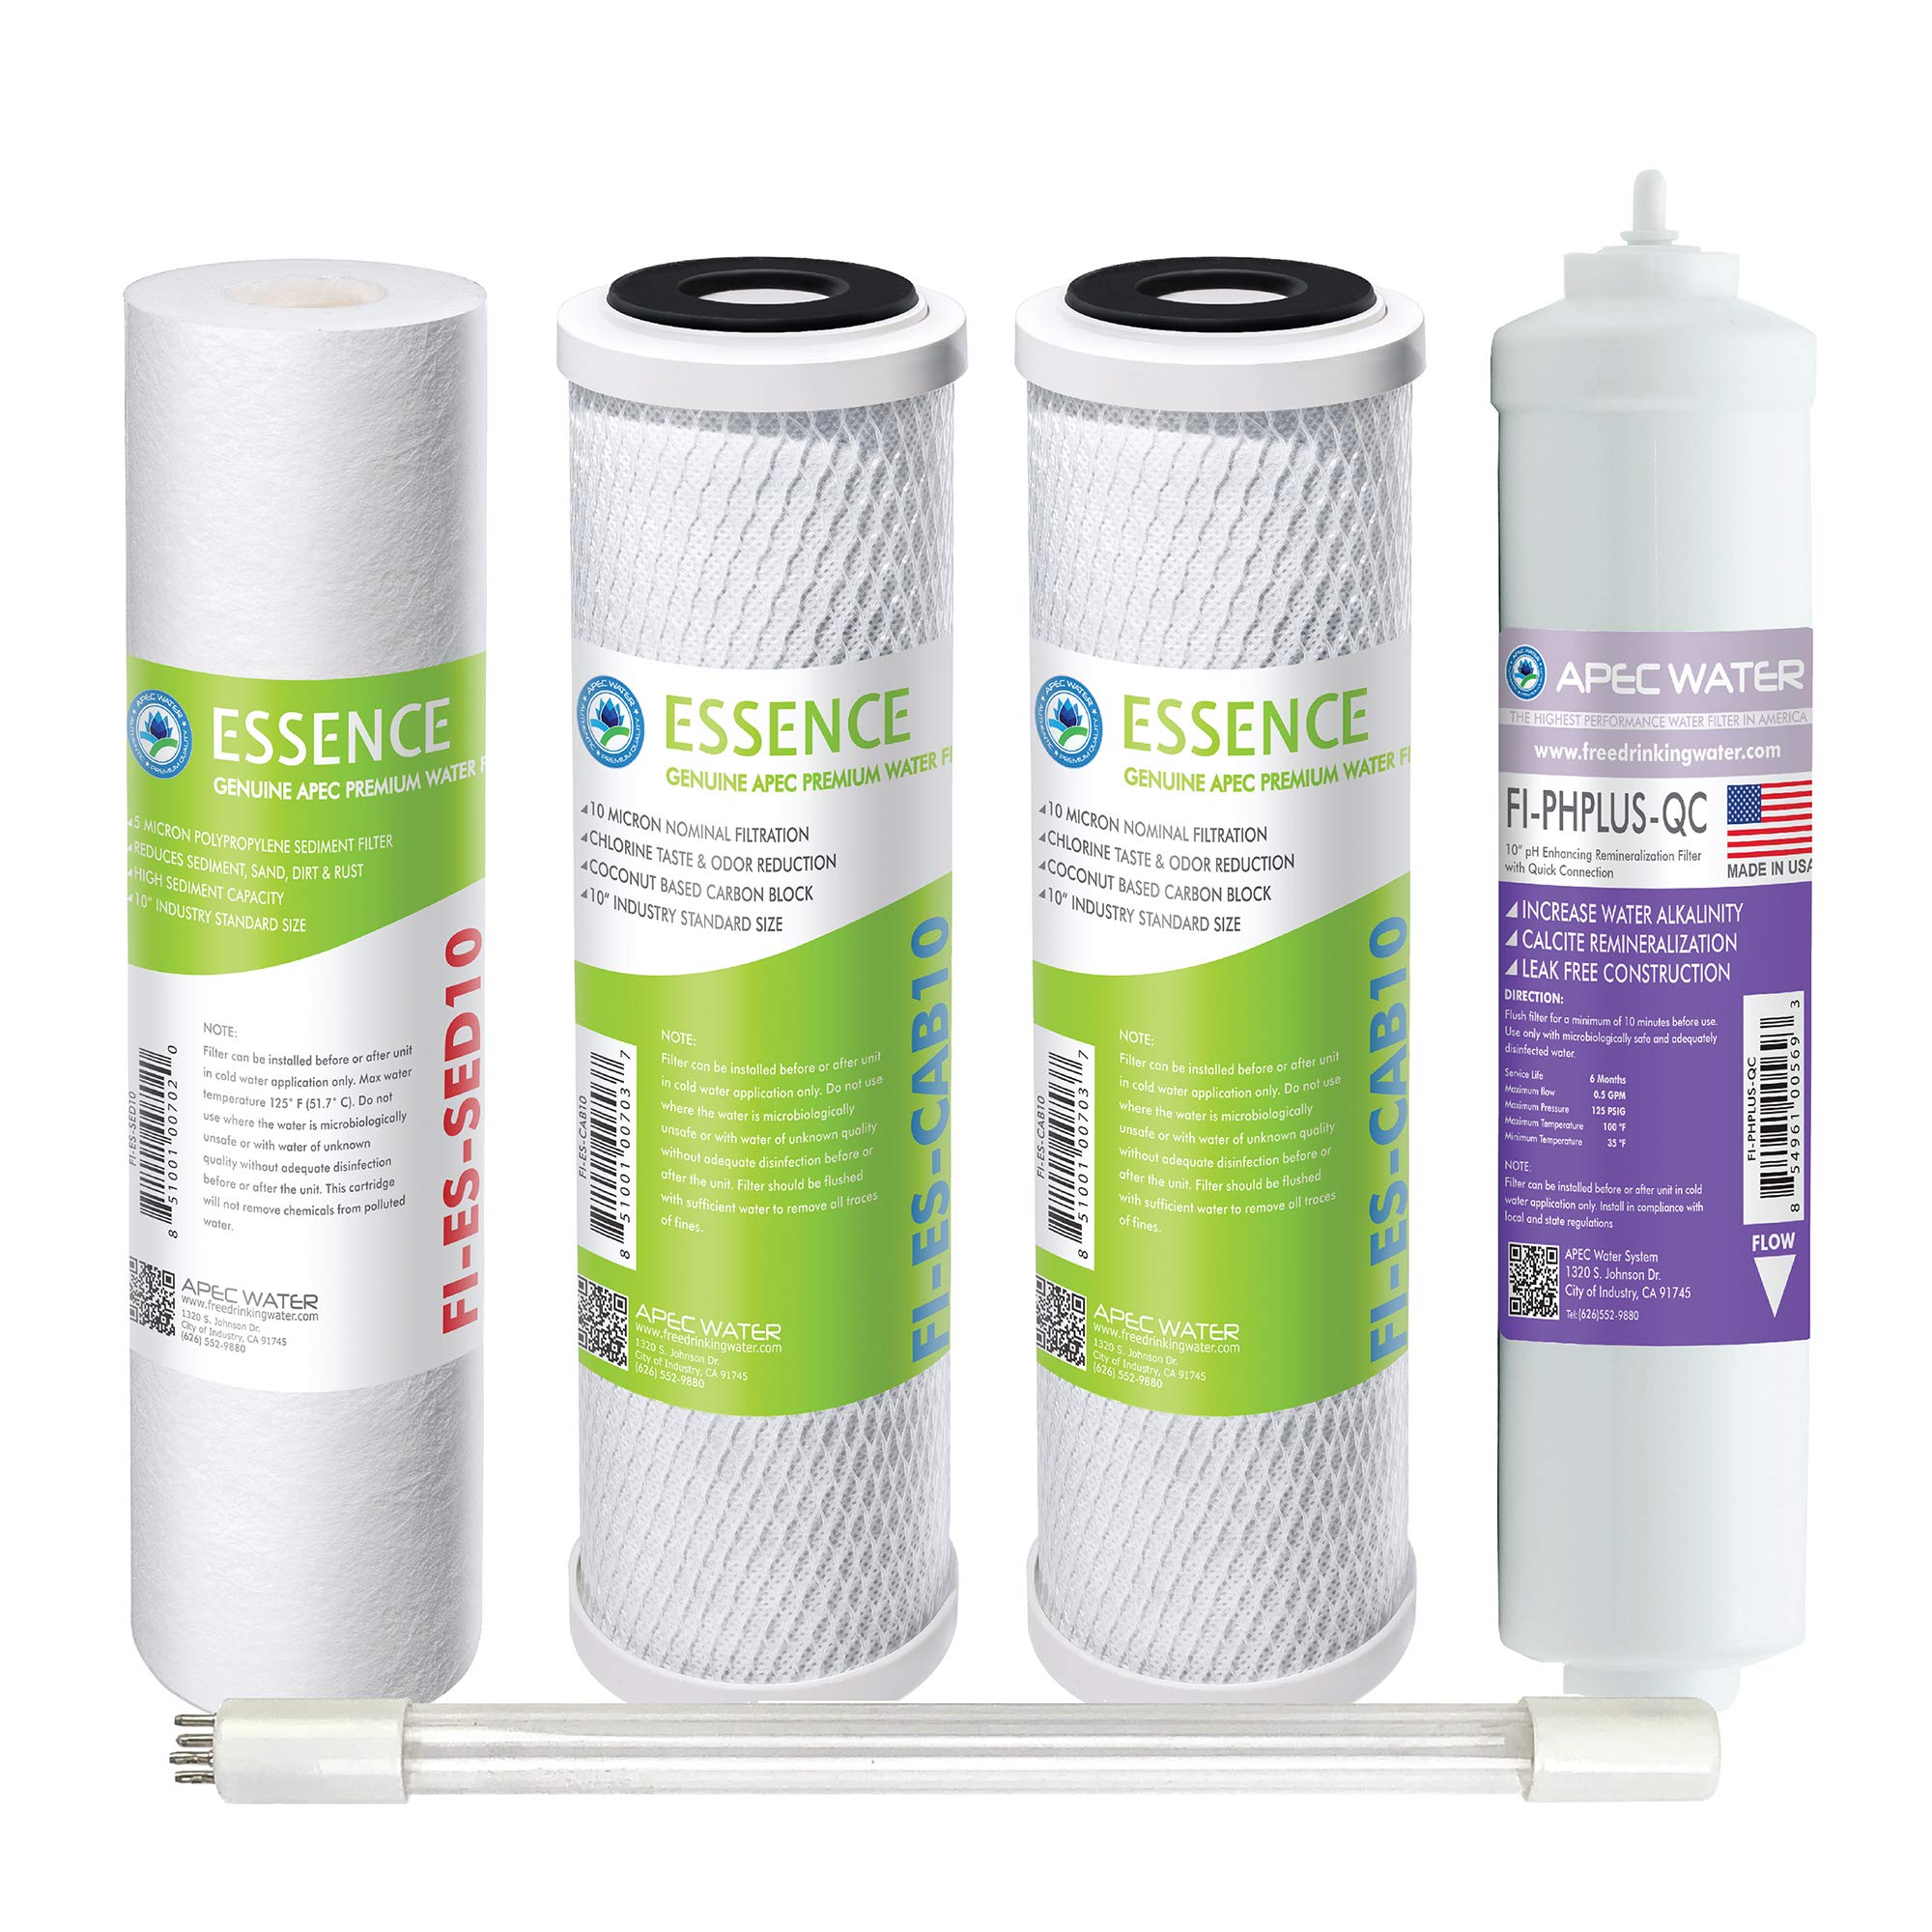 APEC Water Systems Filter-Set-ESPHUV-SSV2 High Capacity Replacement Cartridges for Essence Series ROES-PHUV75 Reverse Osmosis Water Filtration Syst...